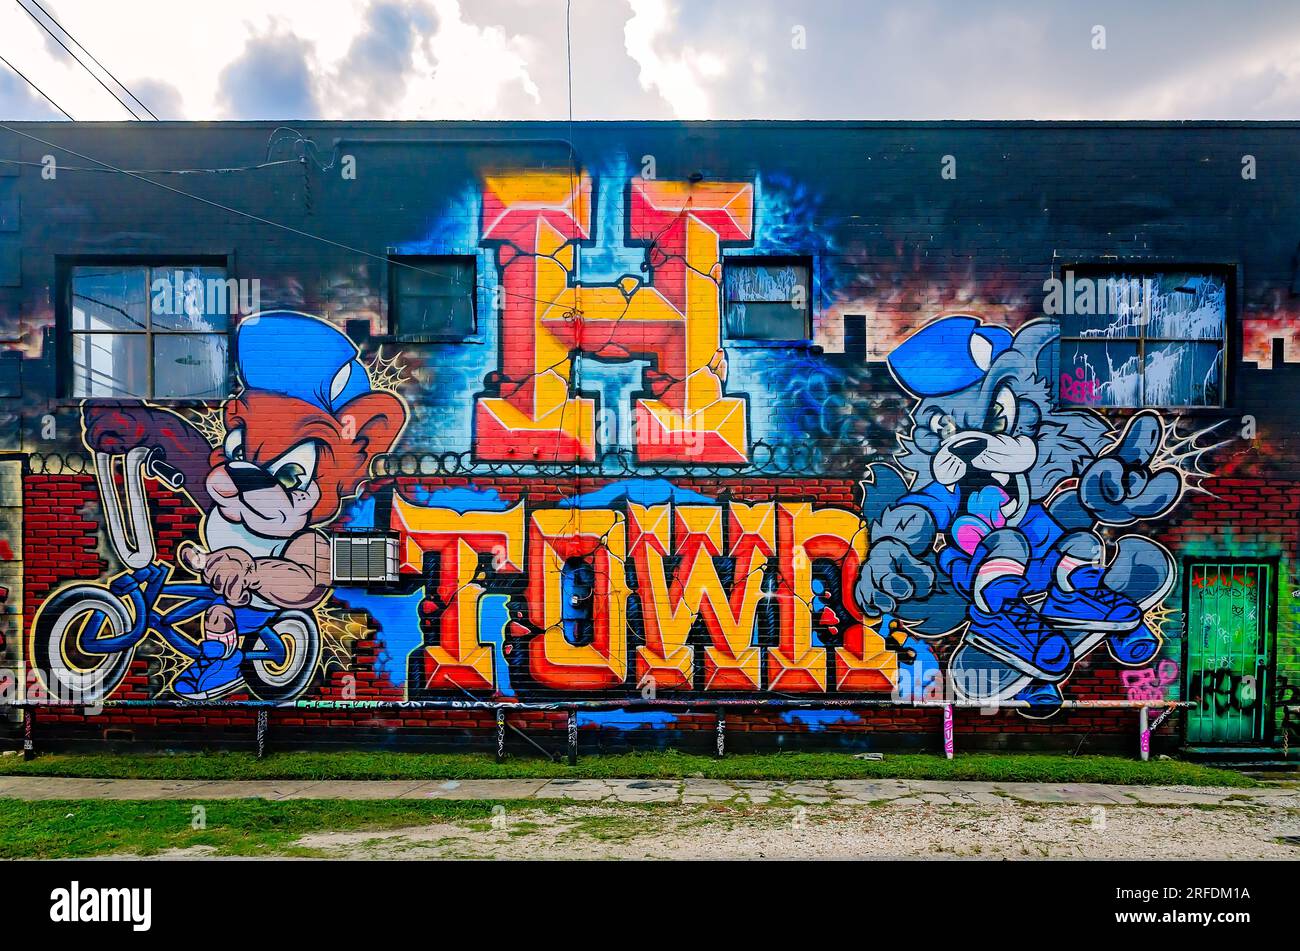 A colorful mural features cartoon characters Tom and Jerry, Sept. 4, 2017, in Houston, Texas. Stock Photo